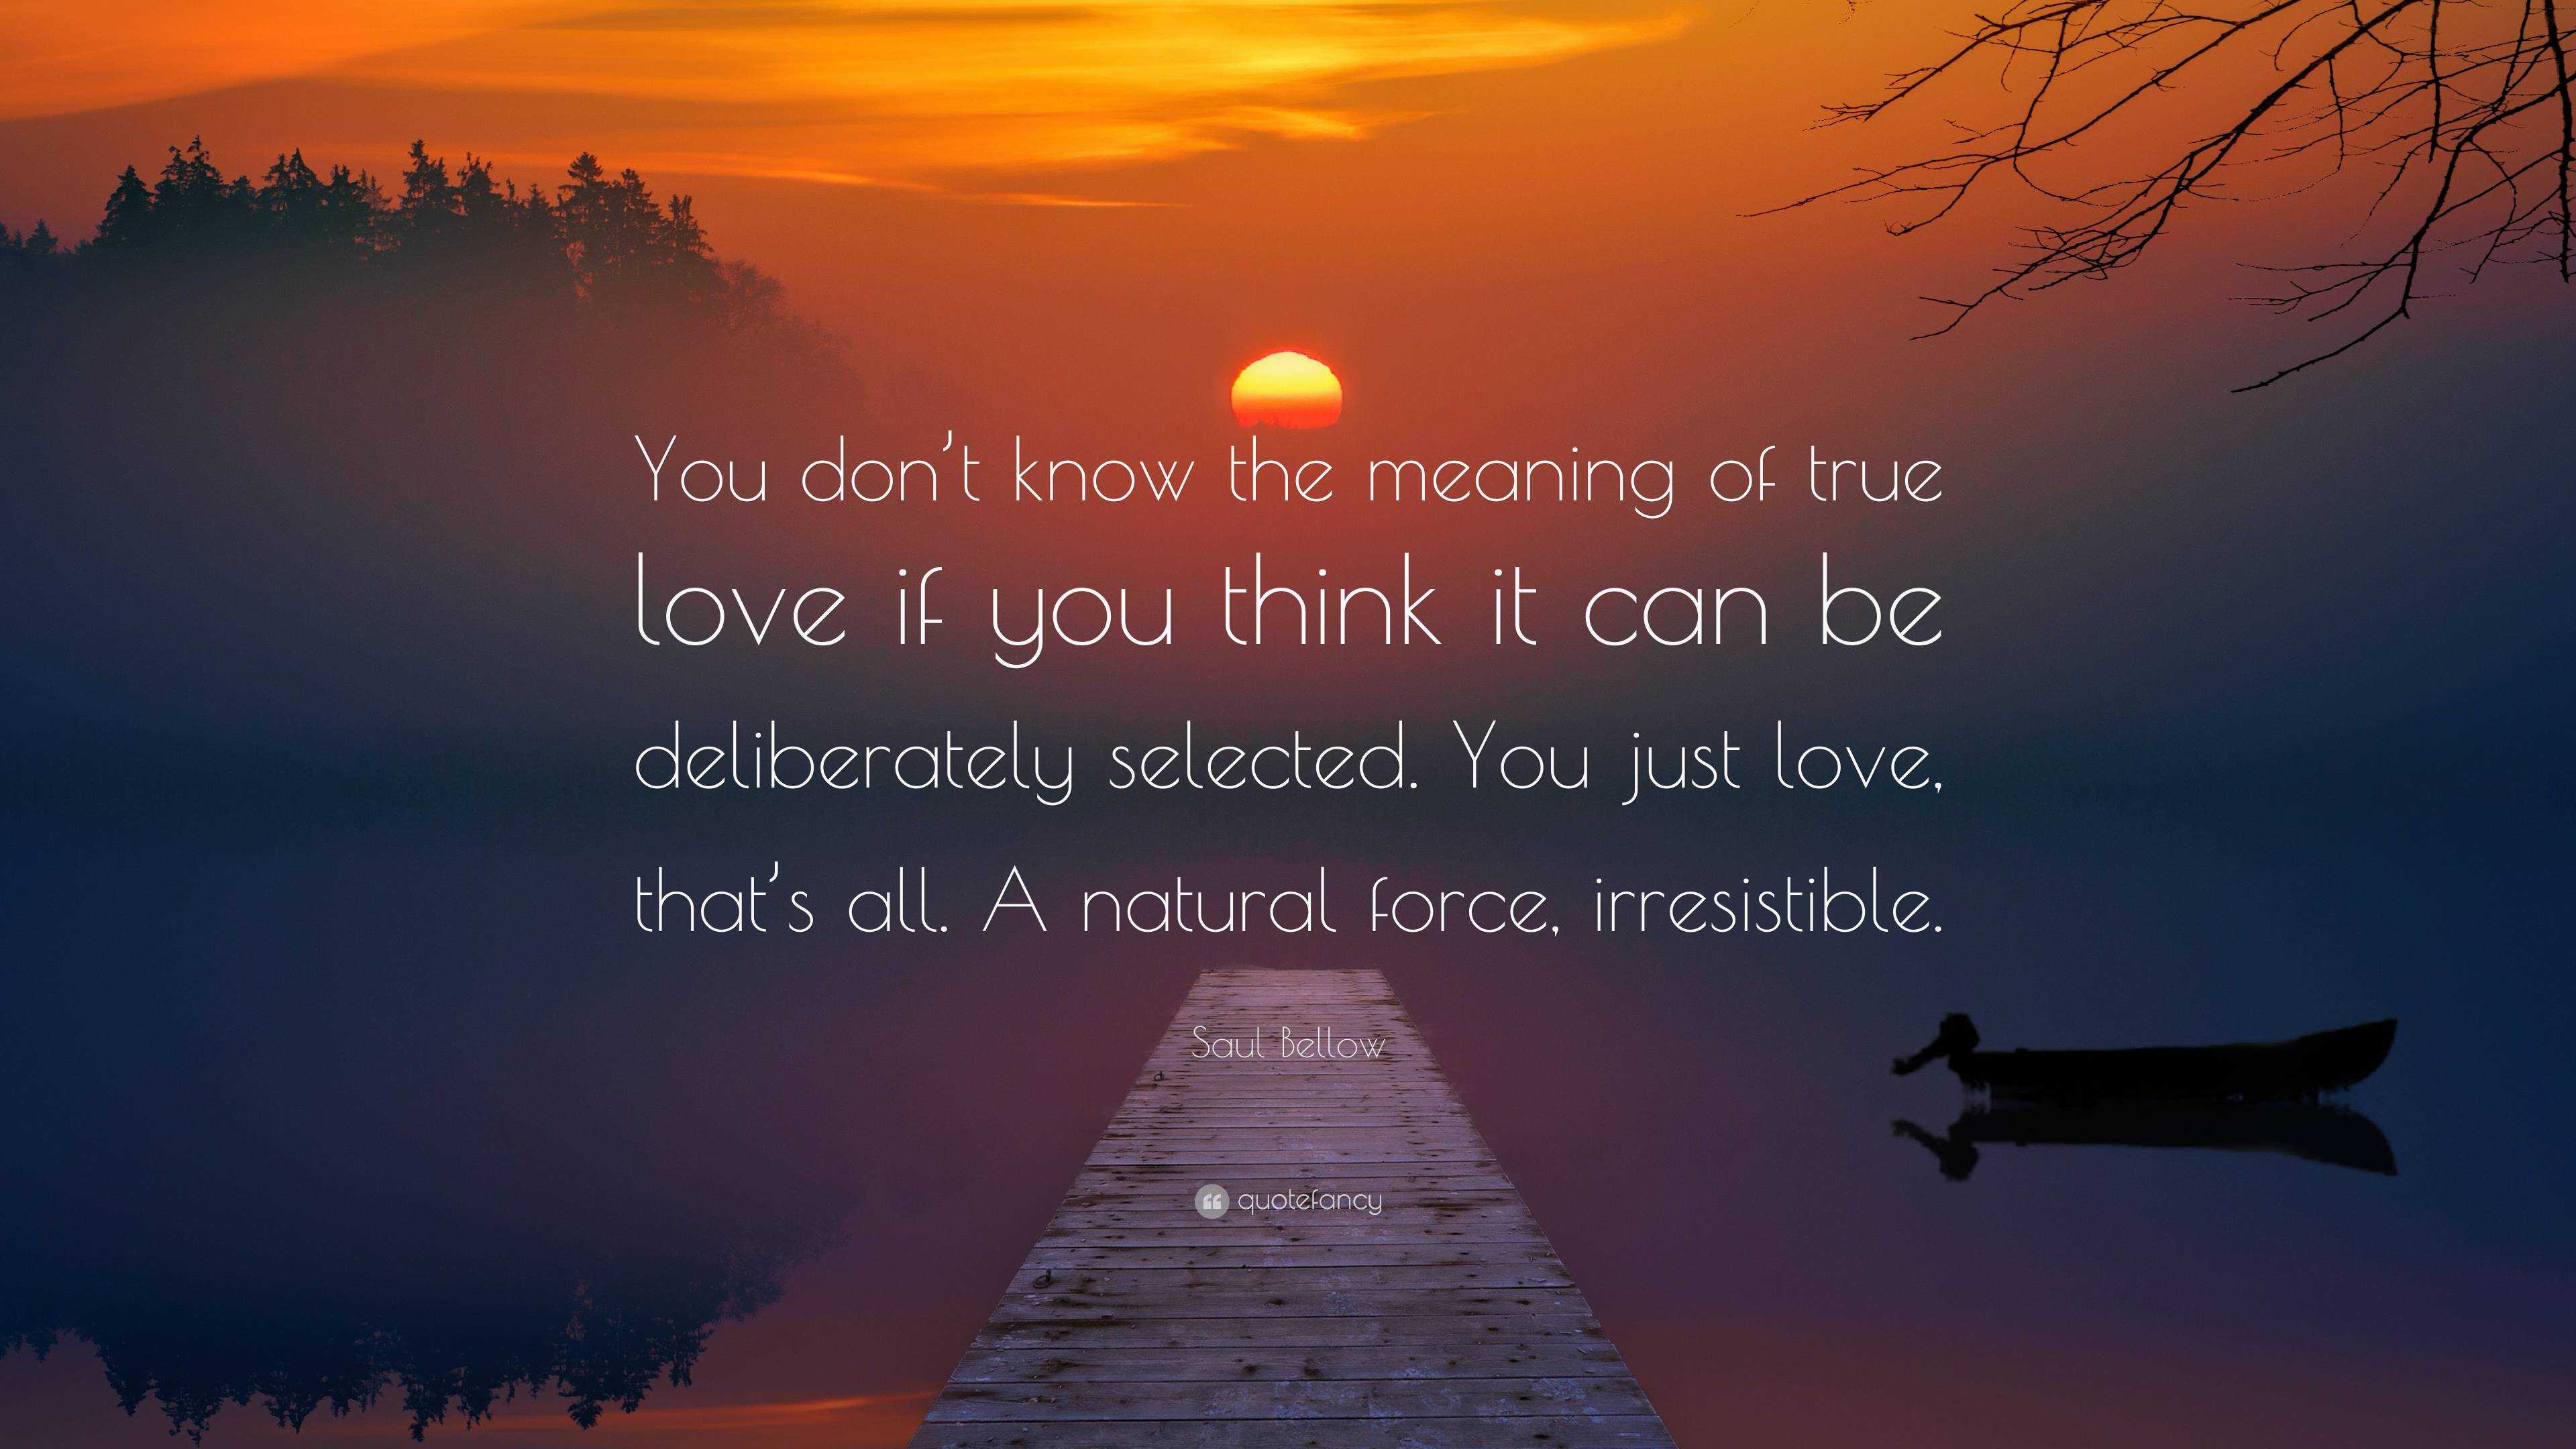 Saul Bellow Quote: “You don’t know the meaning of true love if you ...